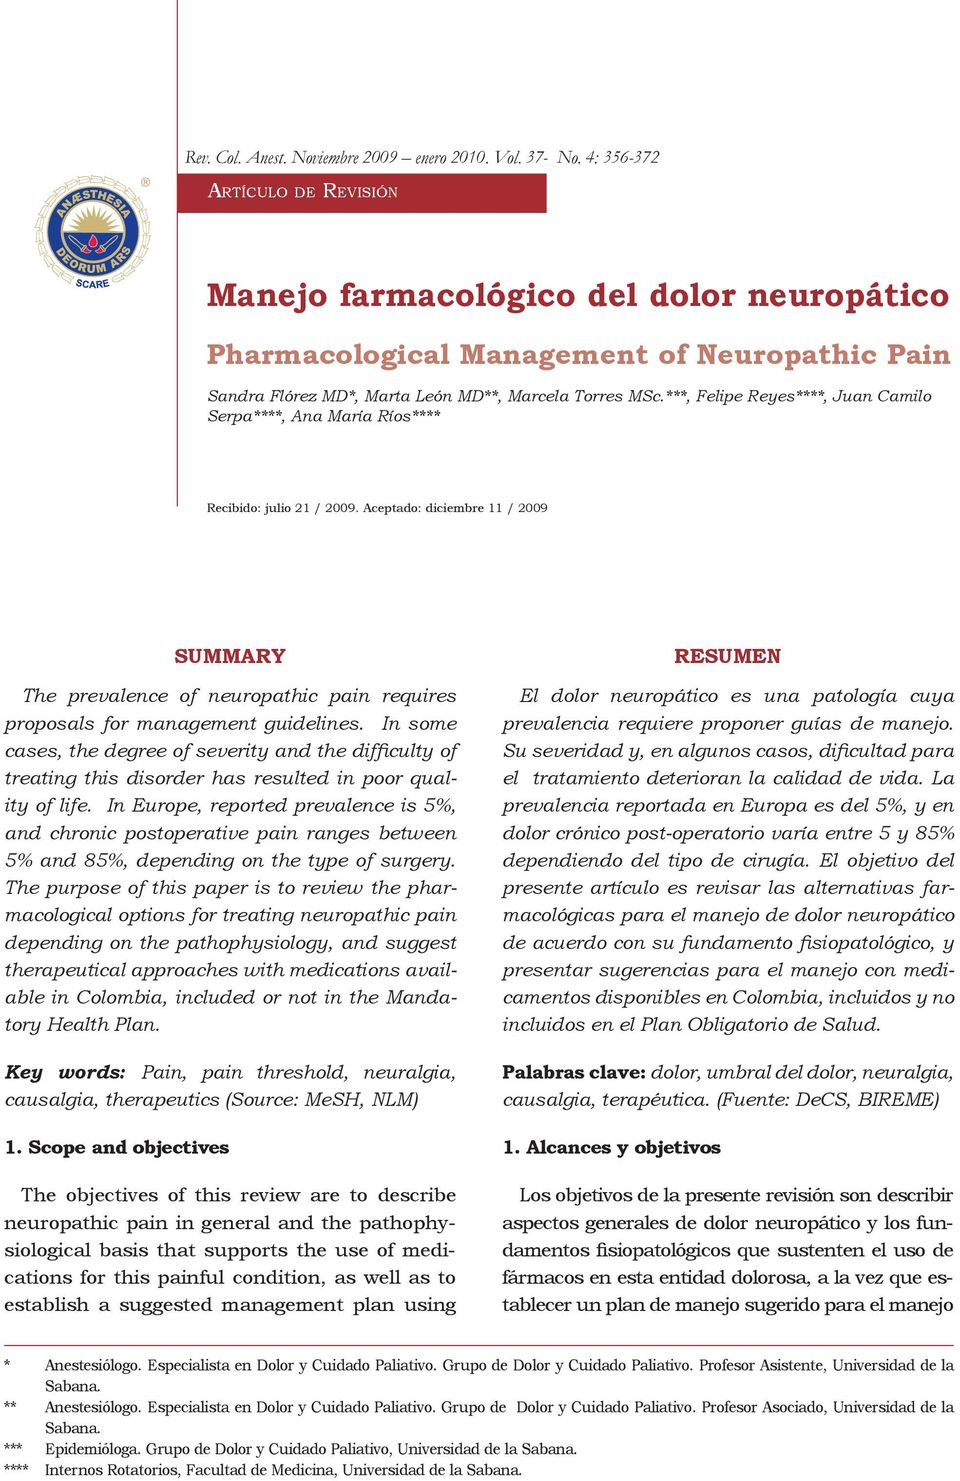 Aceptado: diciembre 11 / 2009 Summary The prevalence of neuropathic pain requires proposals for management guidelines.